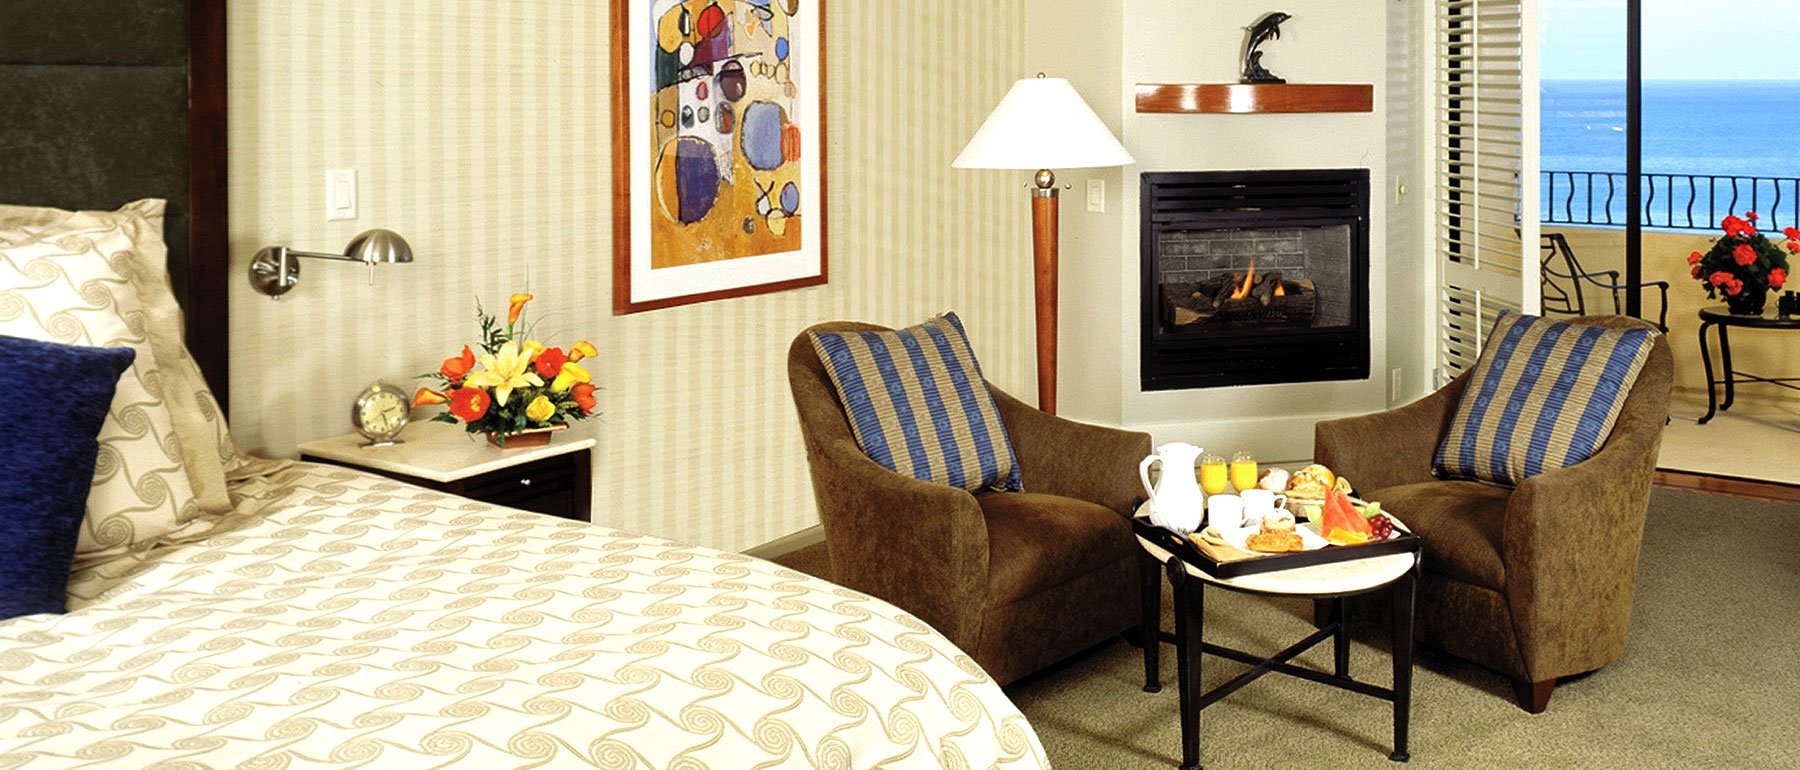 Deluxe Oceanfront Room With Fireplace at Hotel Monterey